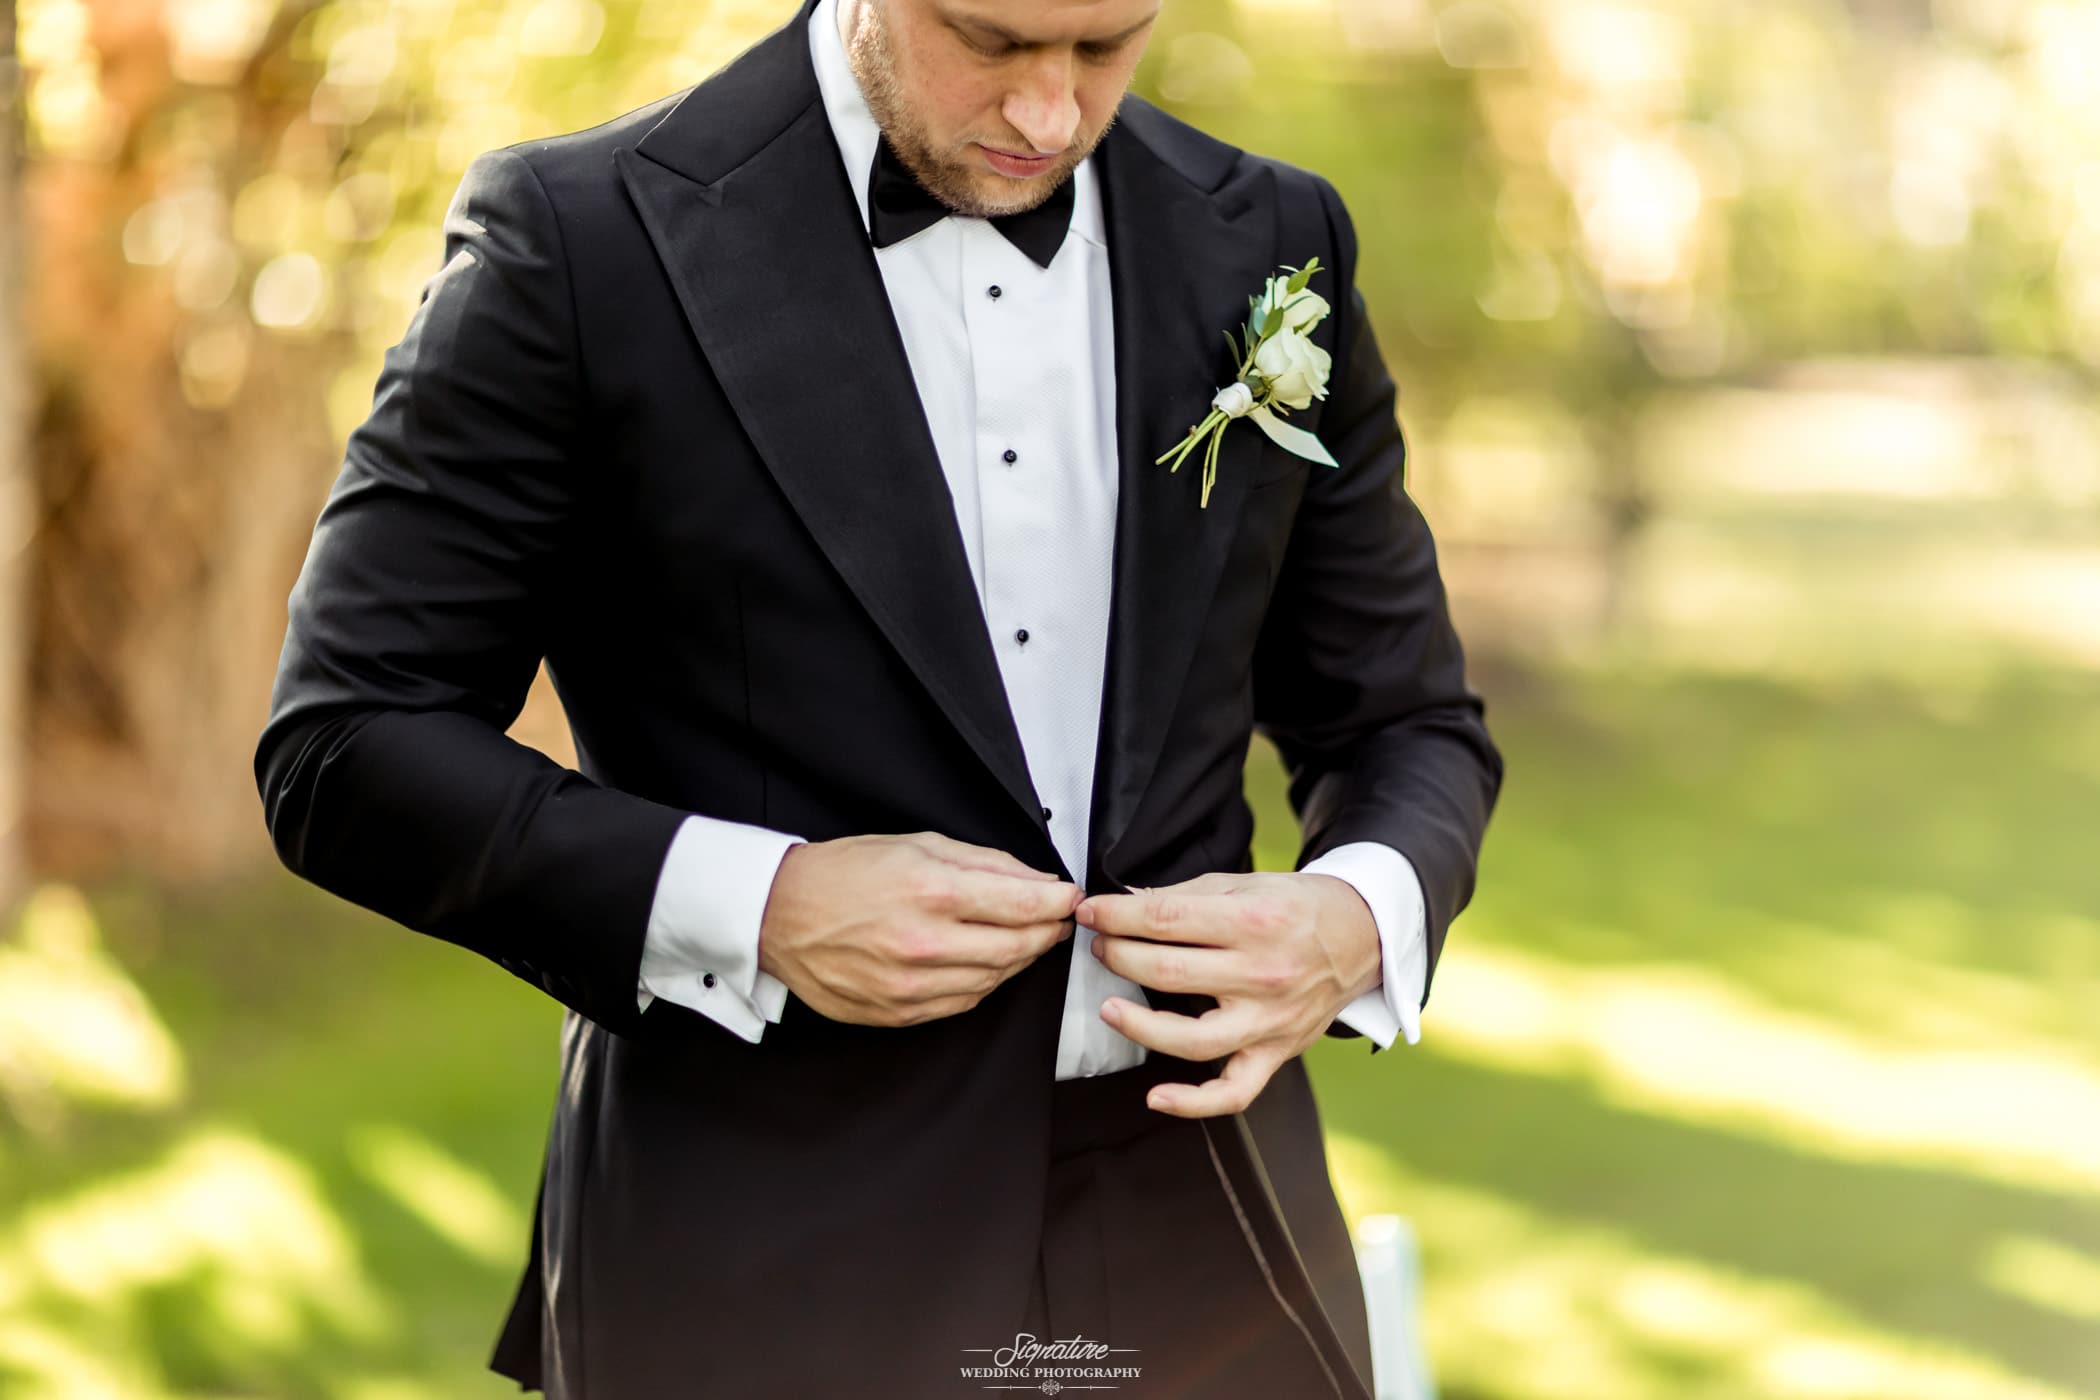 Groom looking down fastening suit button